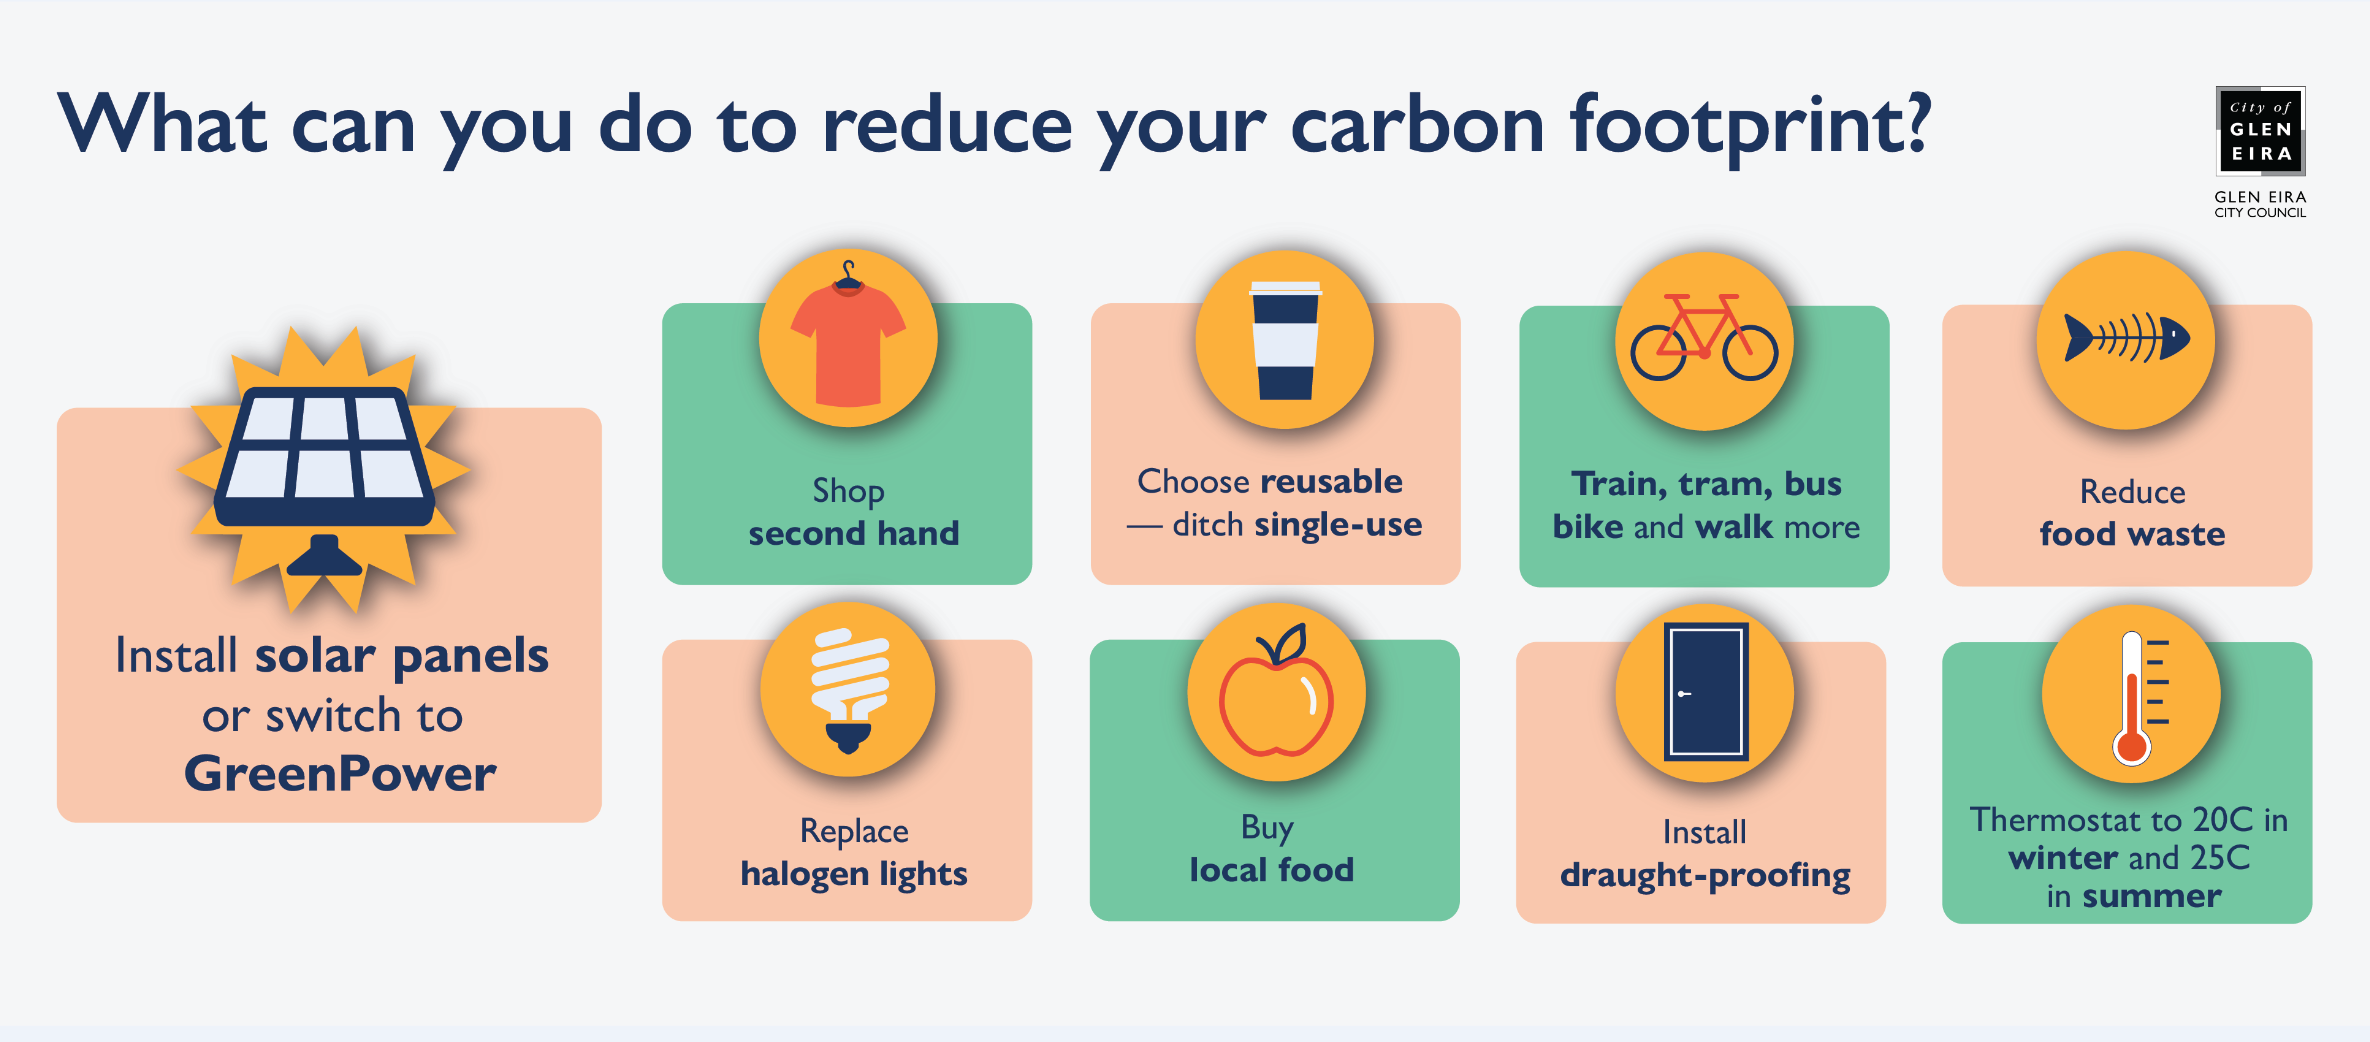 List of ways to reduce your carbon footprint described in the text below.